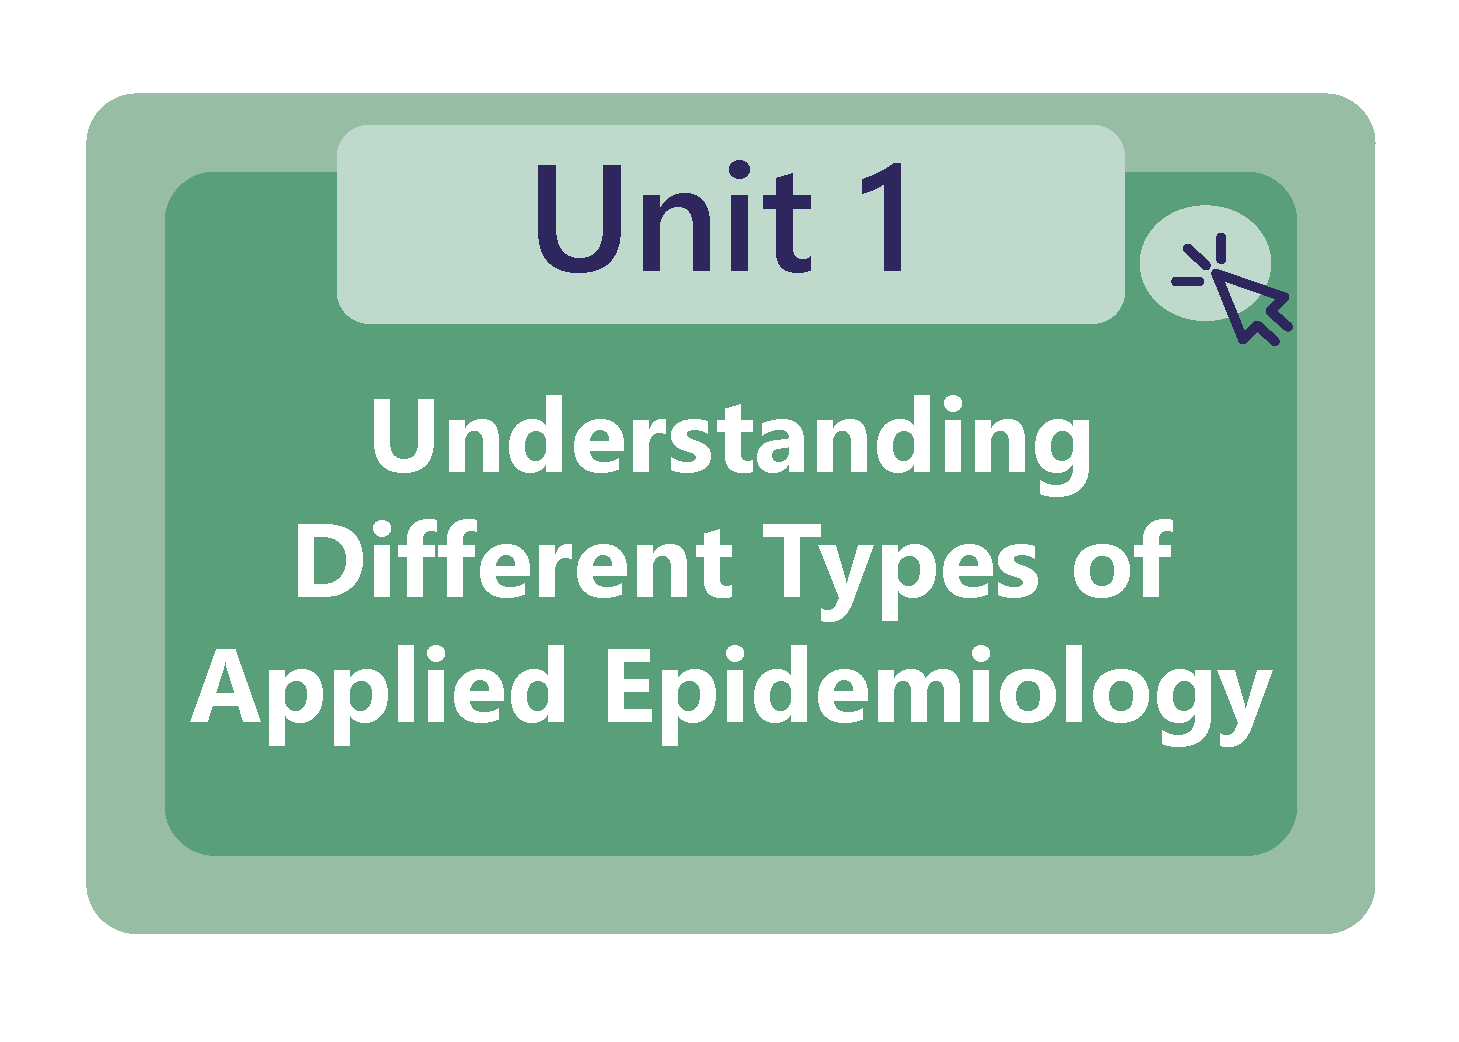 Unit 1: Understanding Different Types of Applied Epidemiology